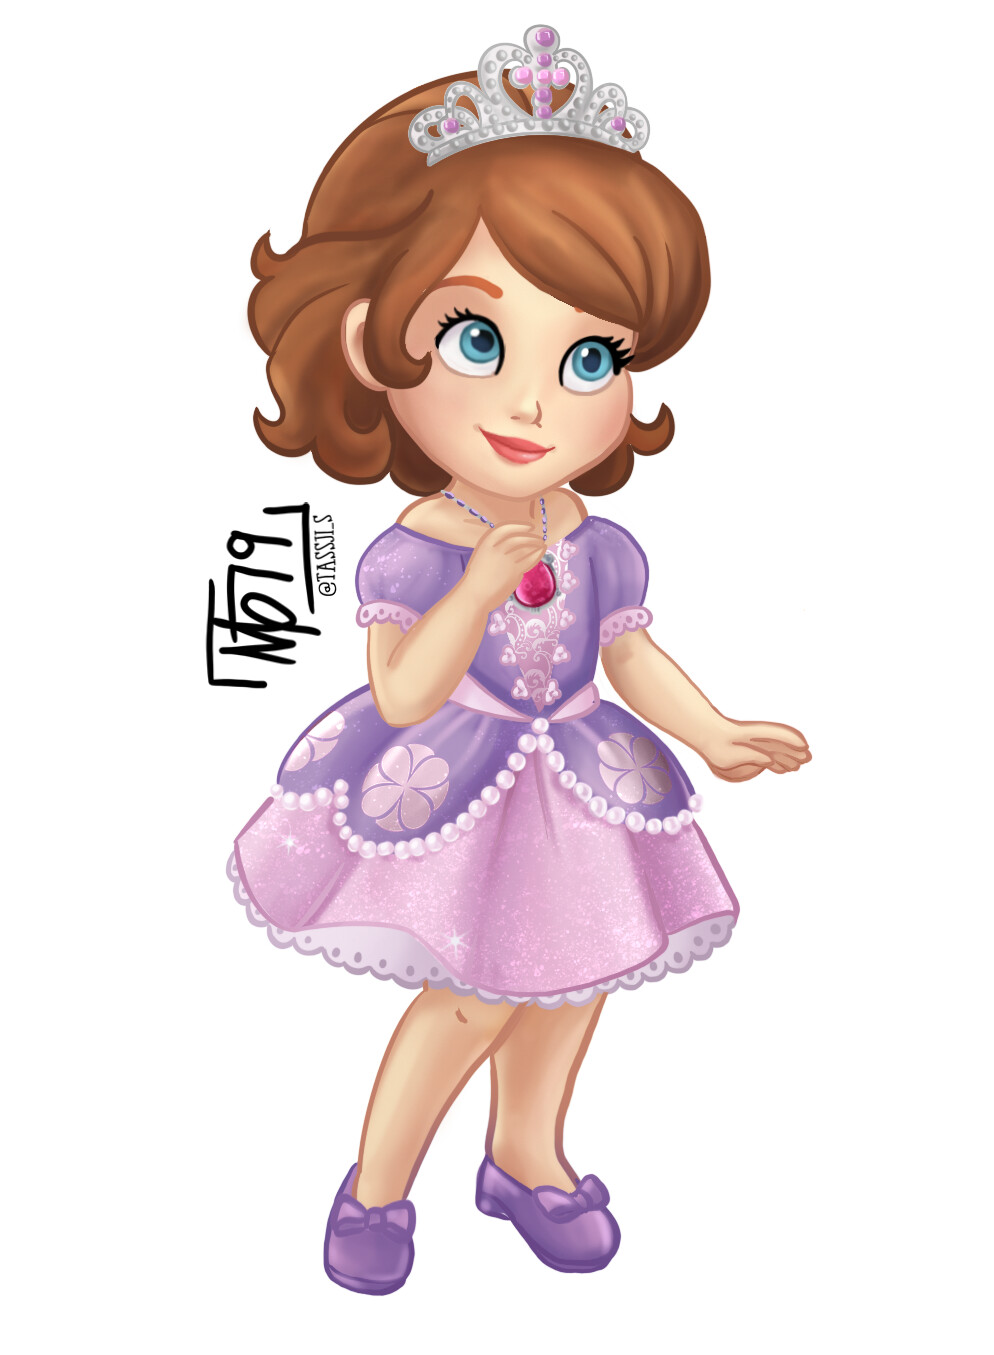 ArtStation - Sofia the First- Disney Toddlers